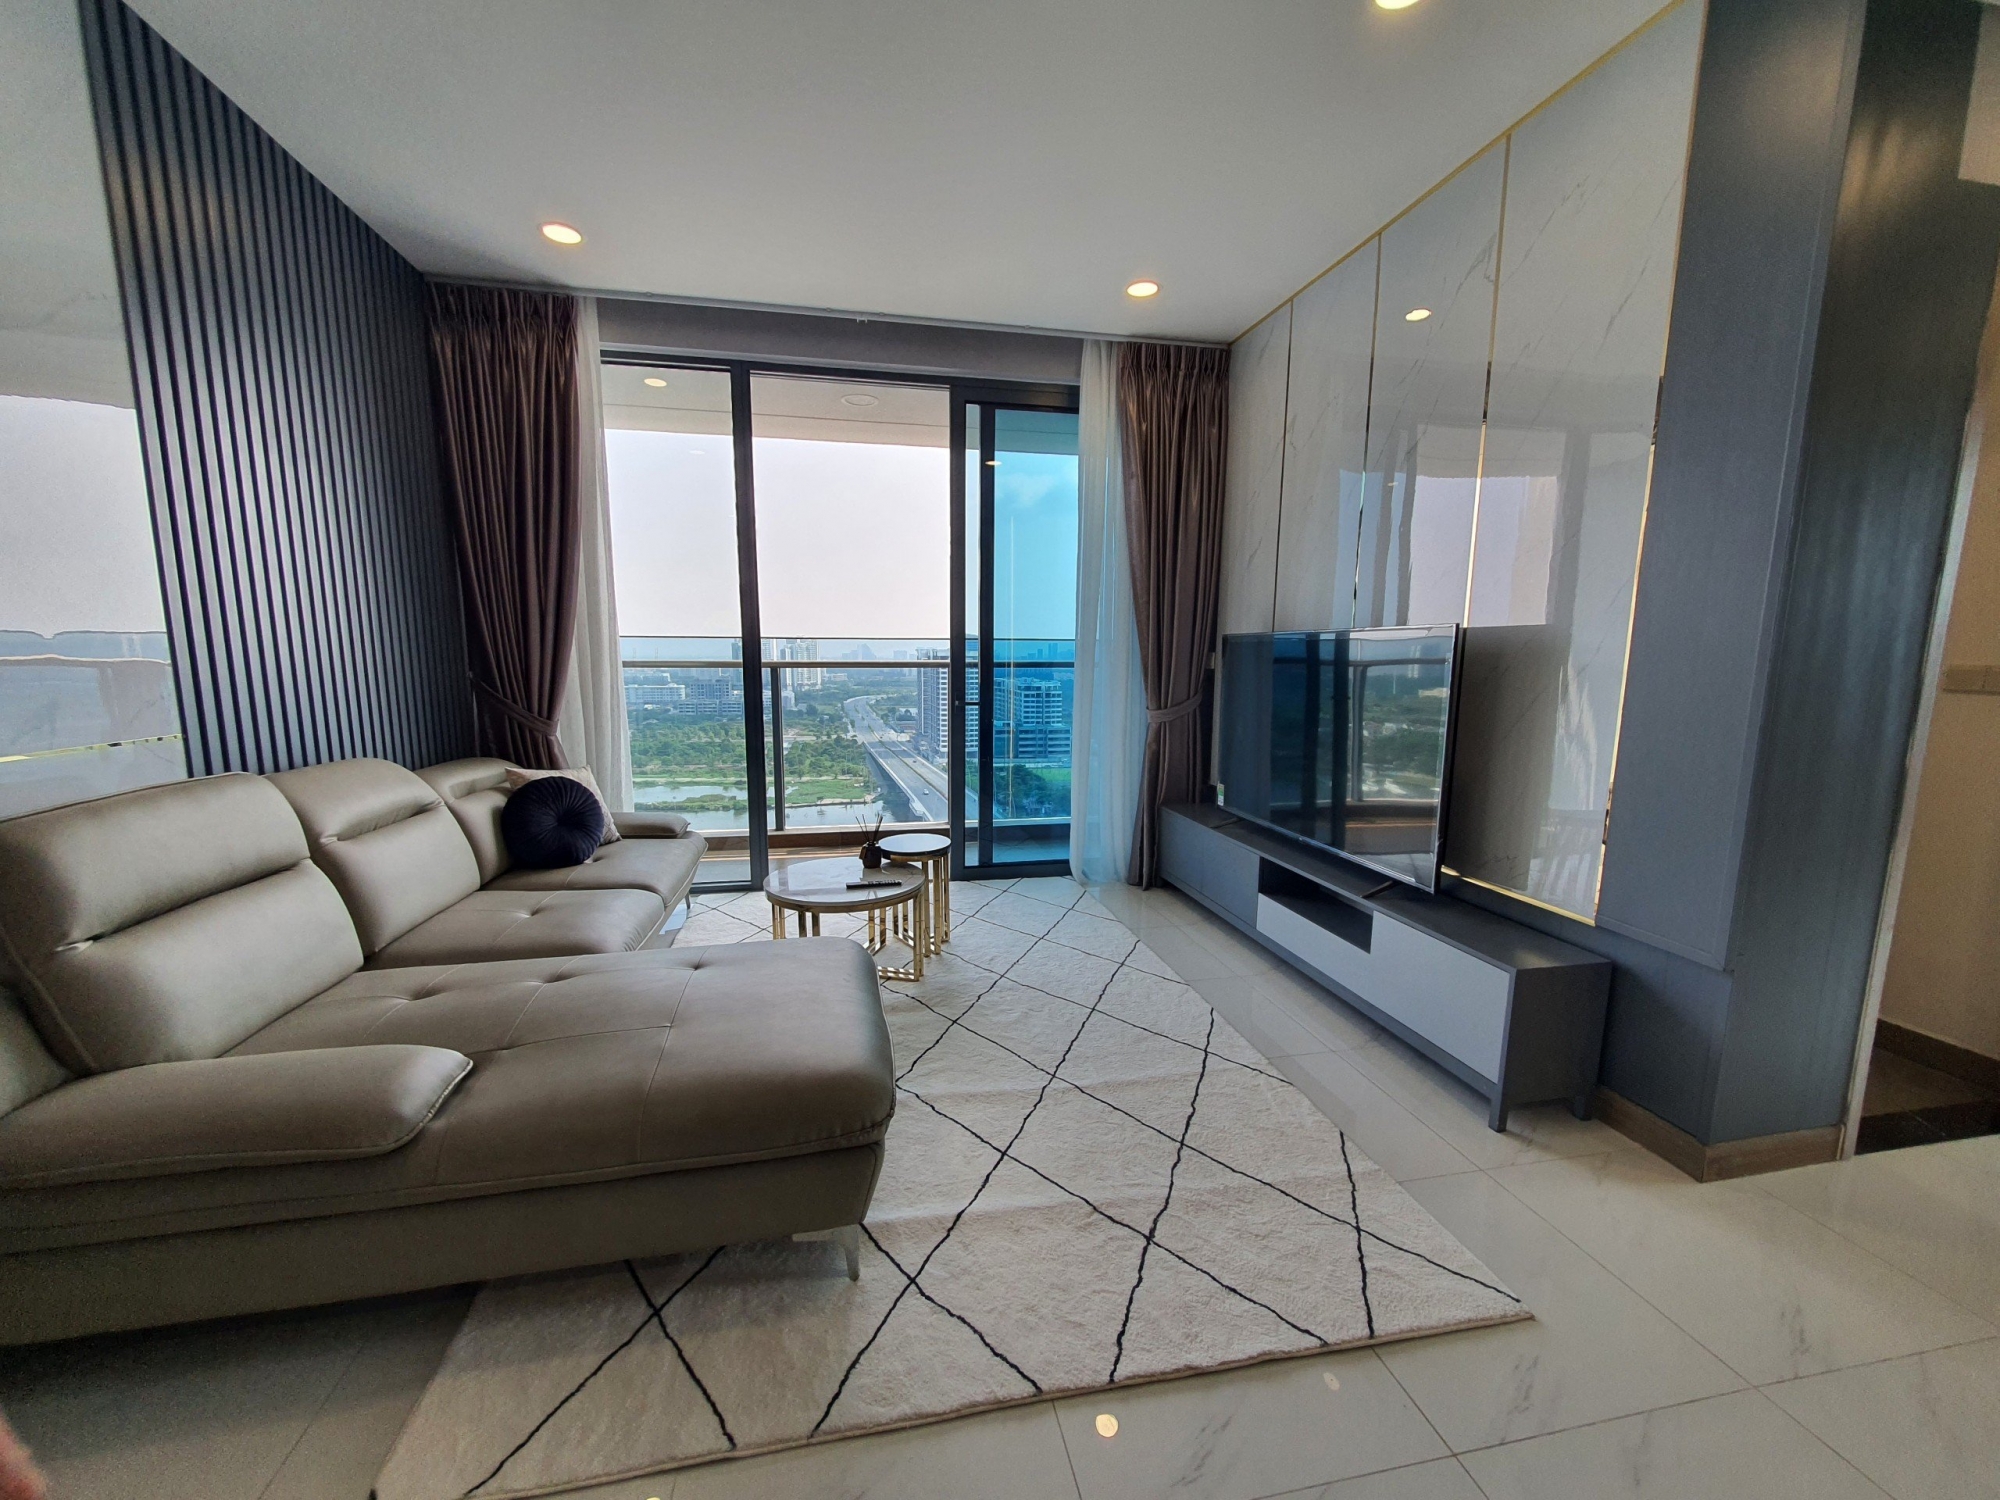 Sunwah Pearl apartment for rent with 3 bedrooms with modern design river view